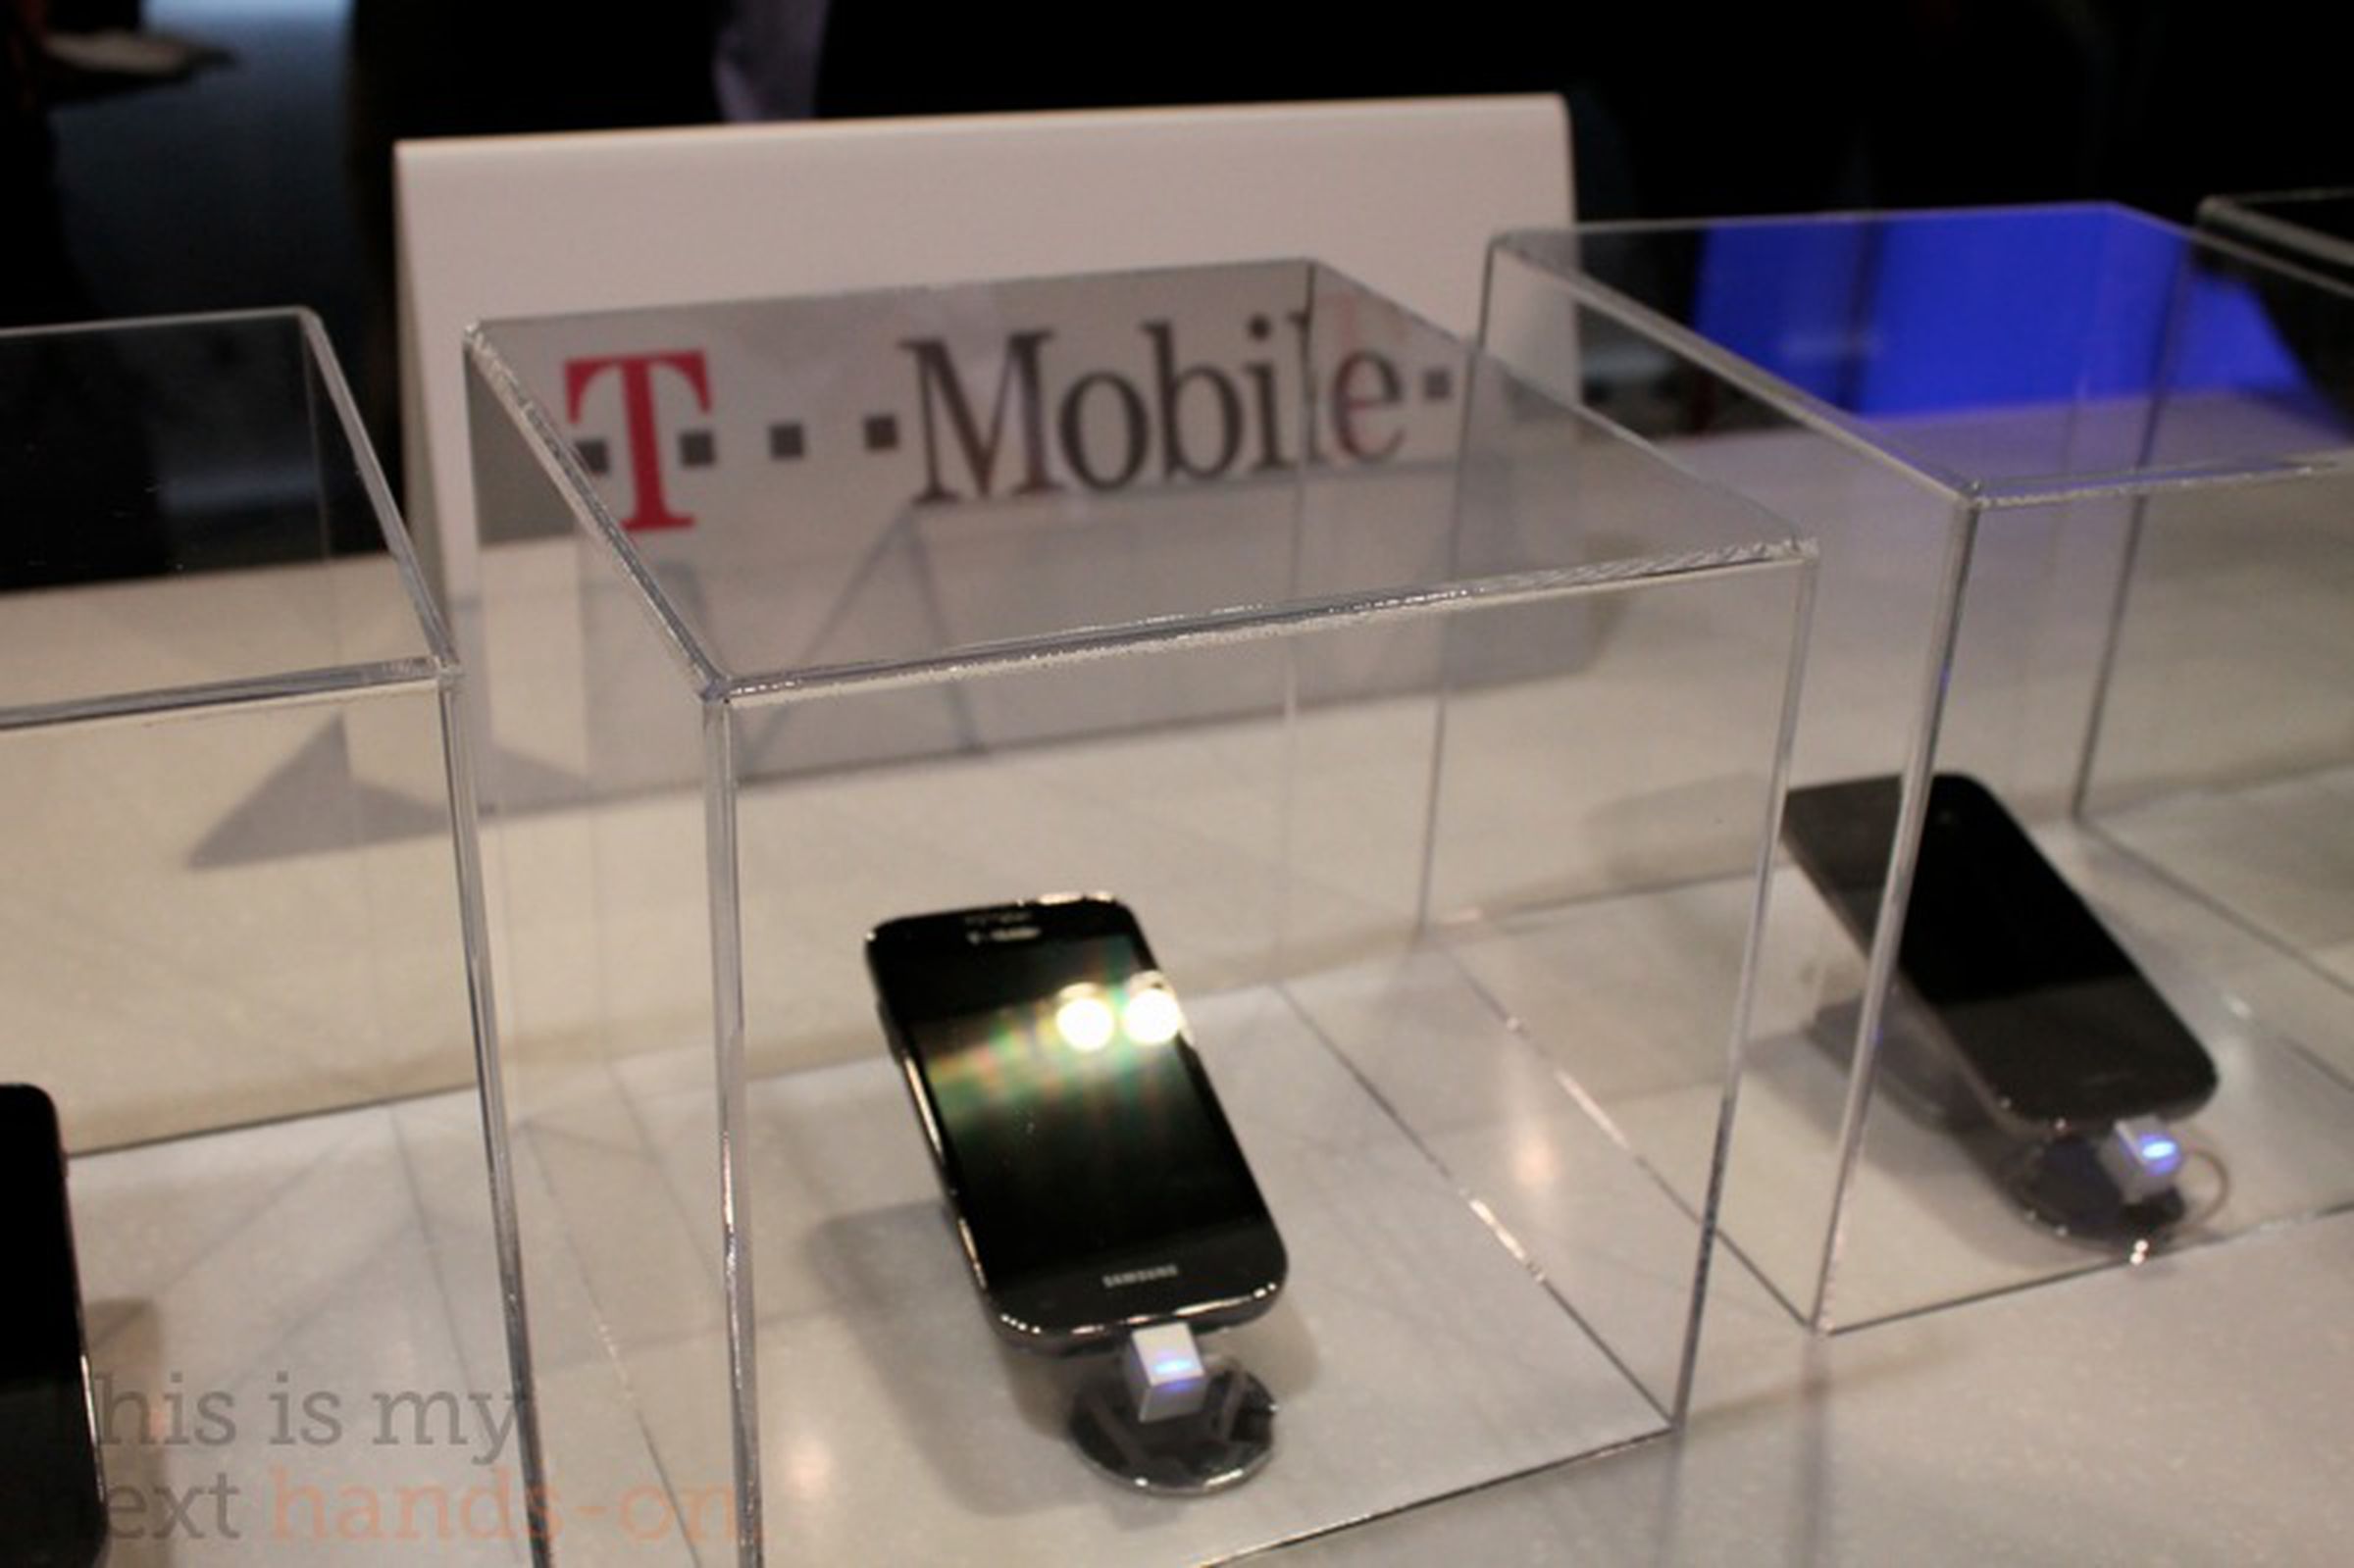 Samsung Galaxy S II on T-Mobile: 4.5-inch Super AMOLED Plus screen, 8-megapixel 1080p camera, and '4G' data speeds — pictures! 